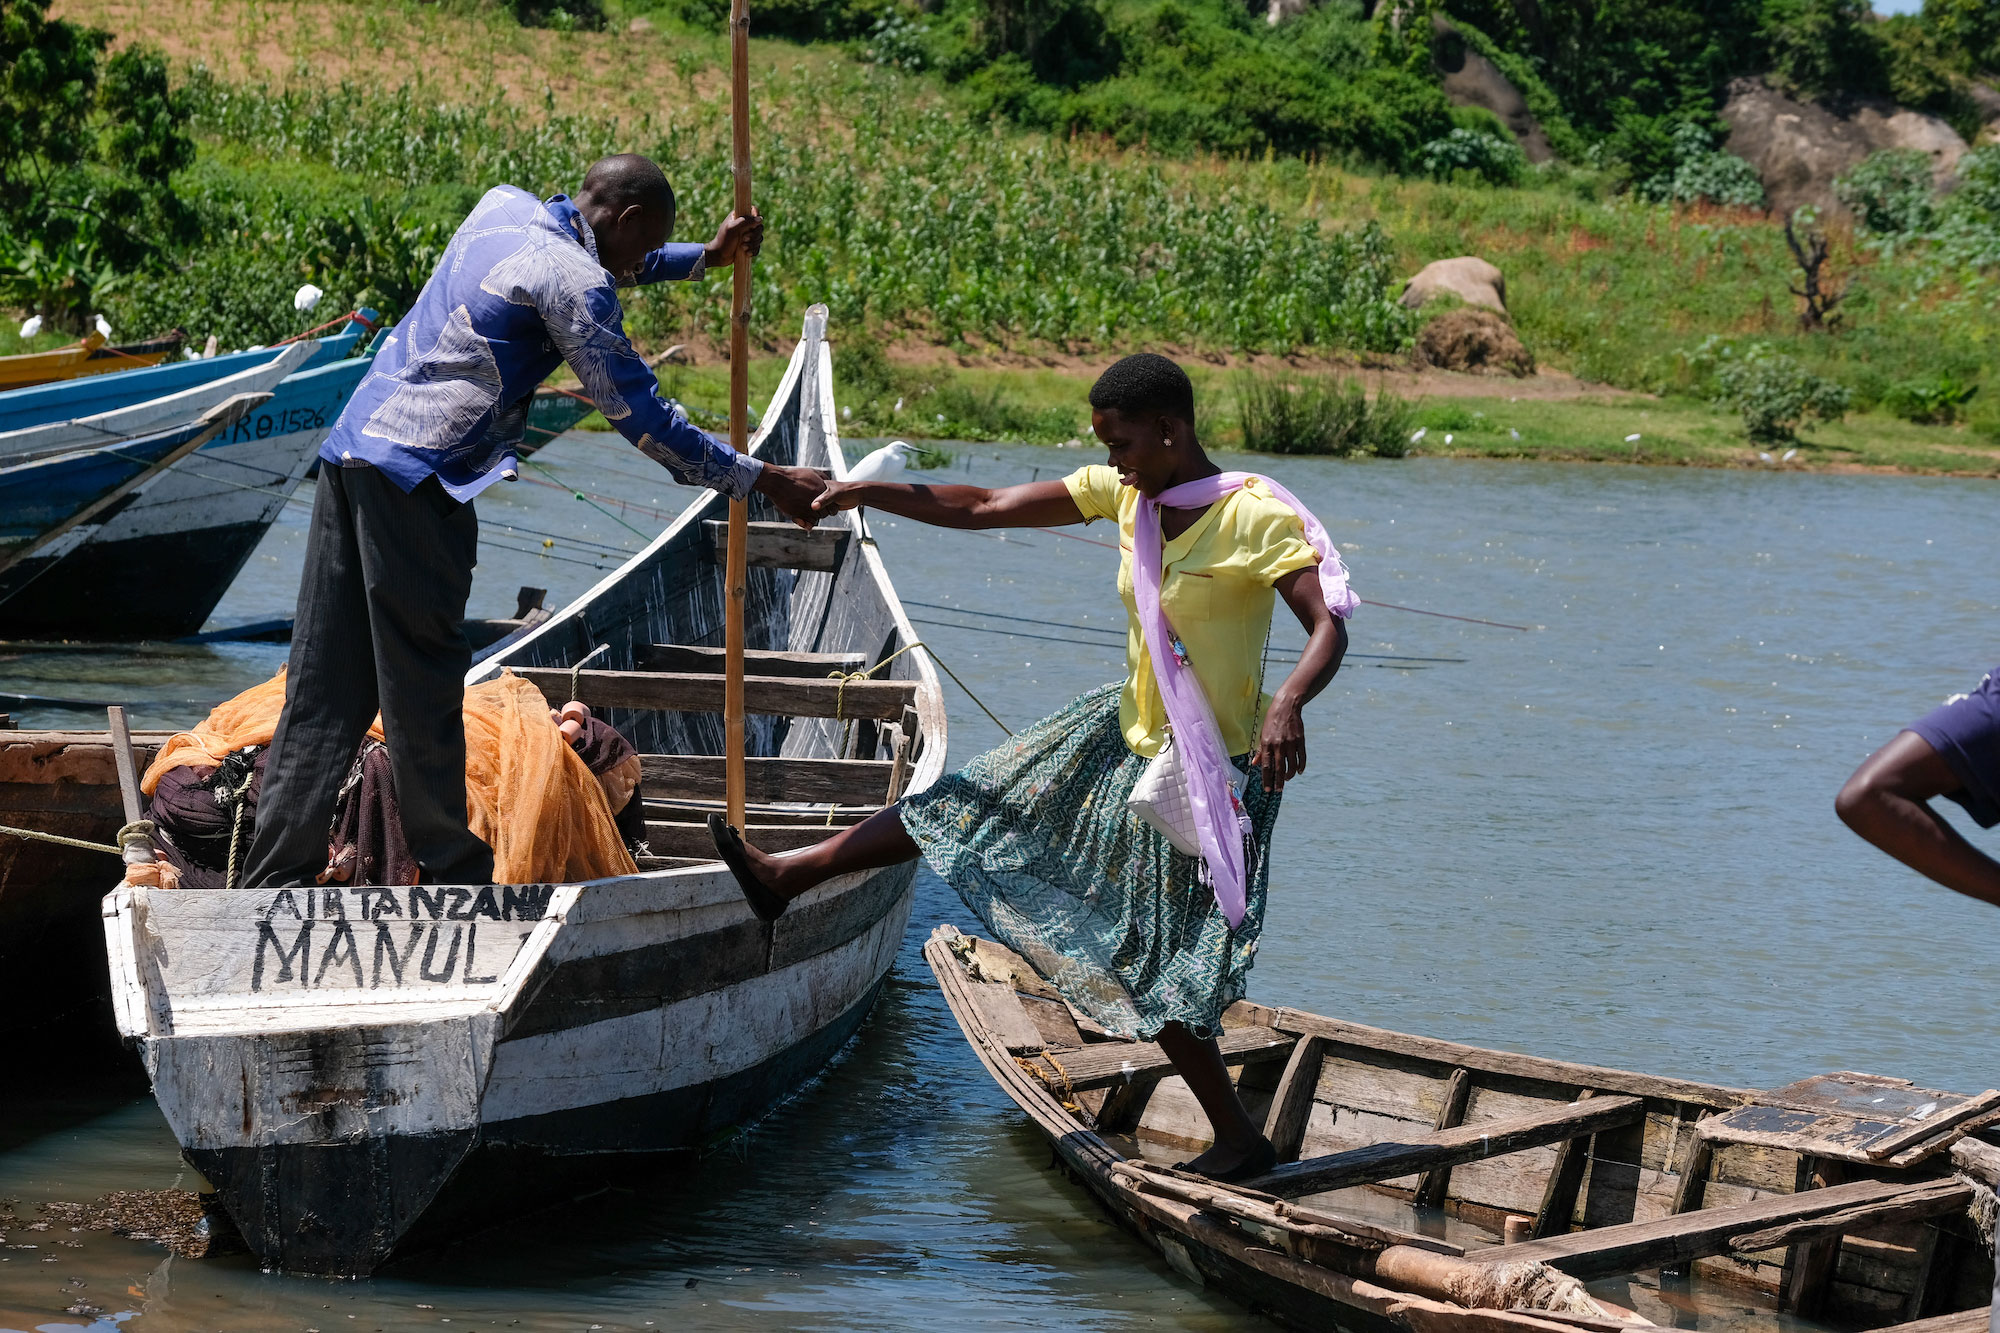 Man helps woman onto a small boat in Tanzania